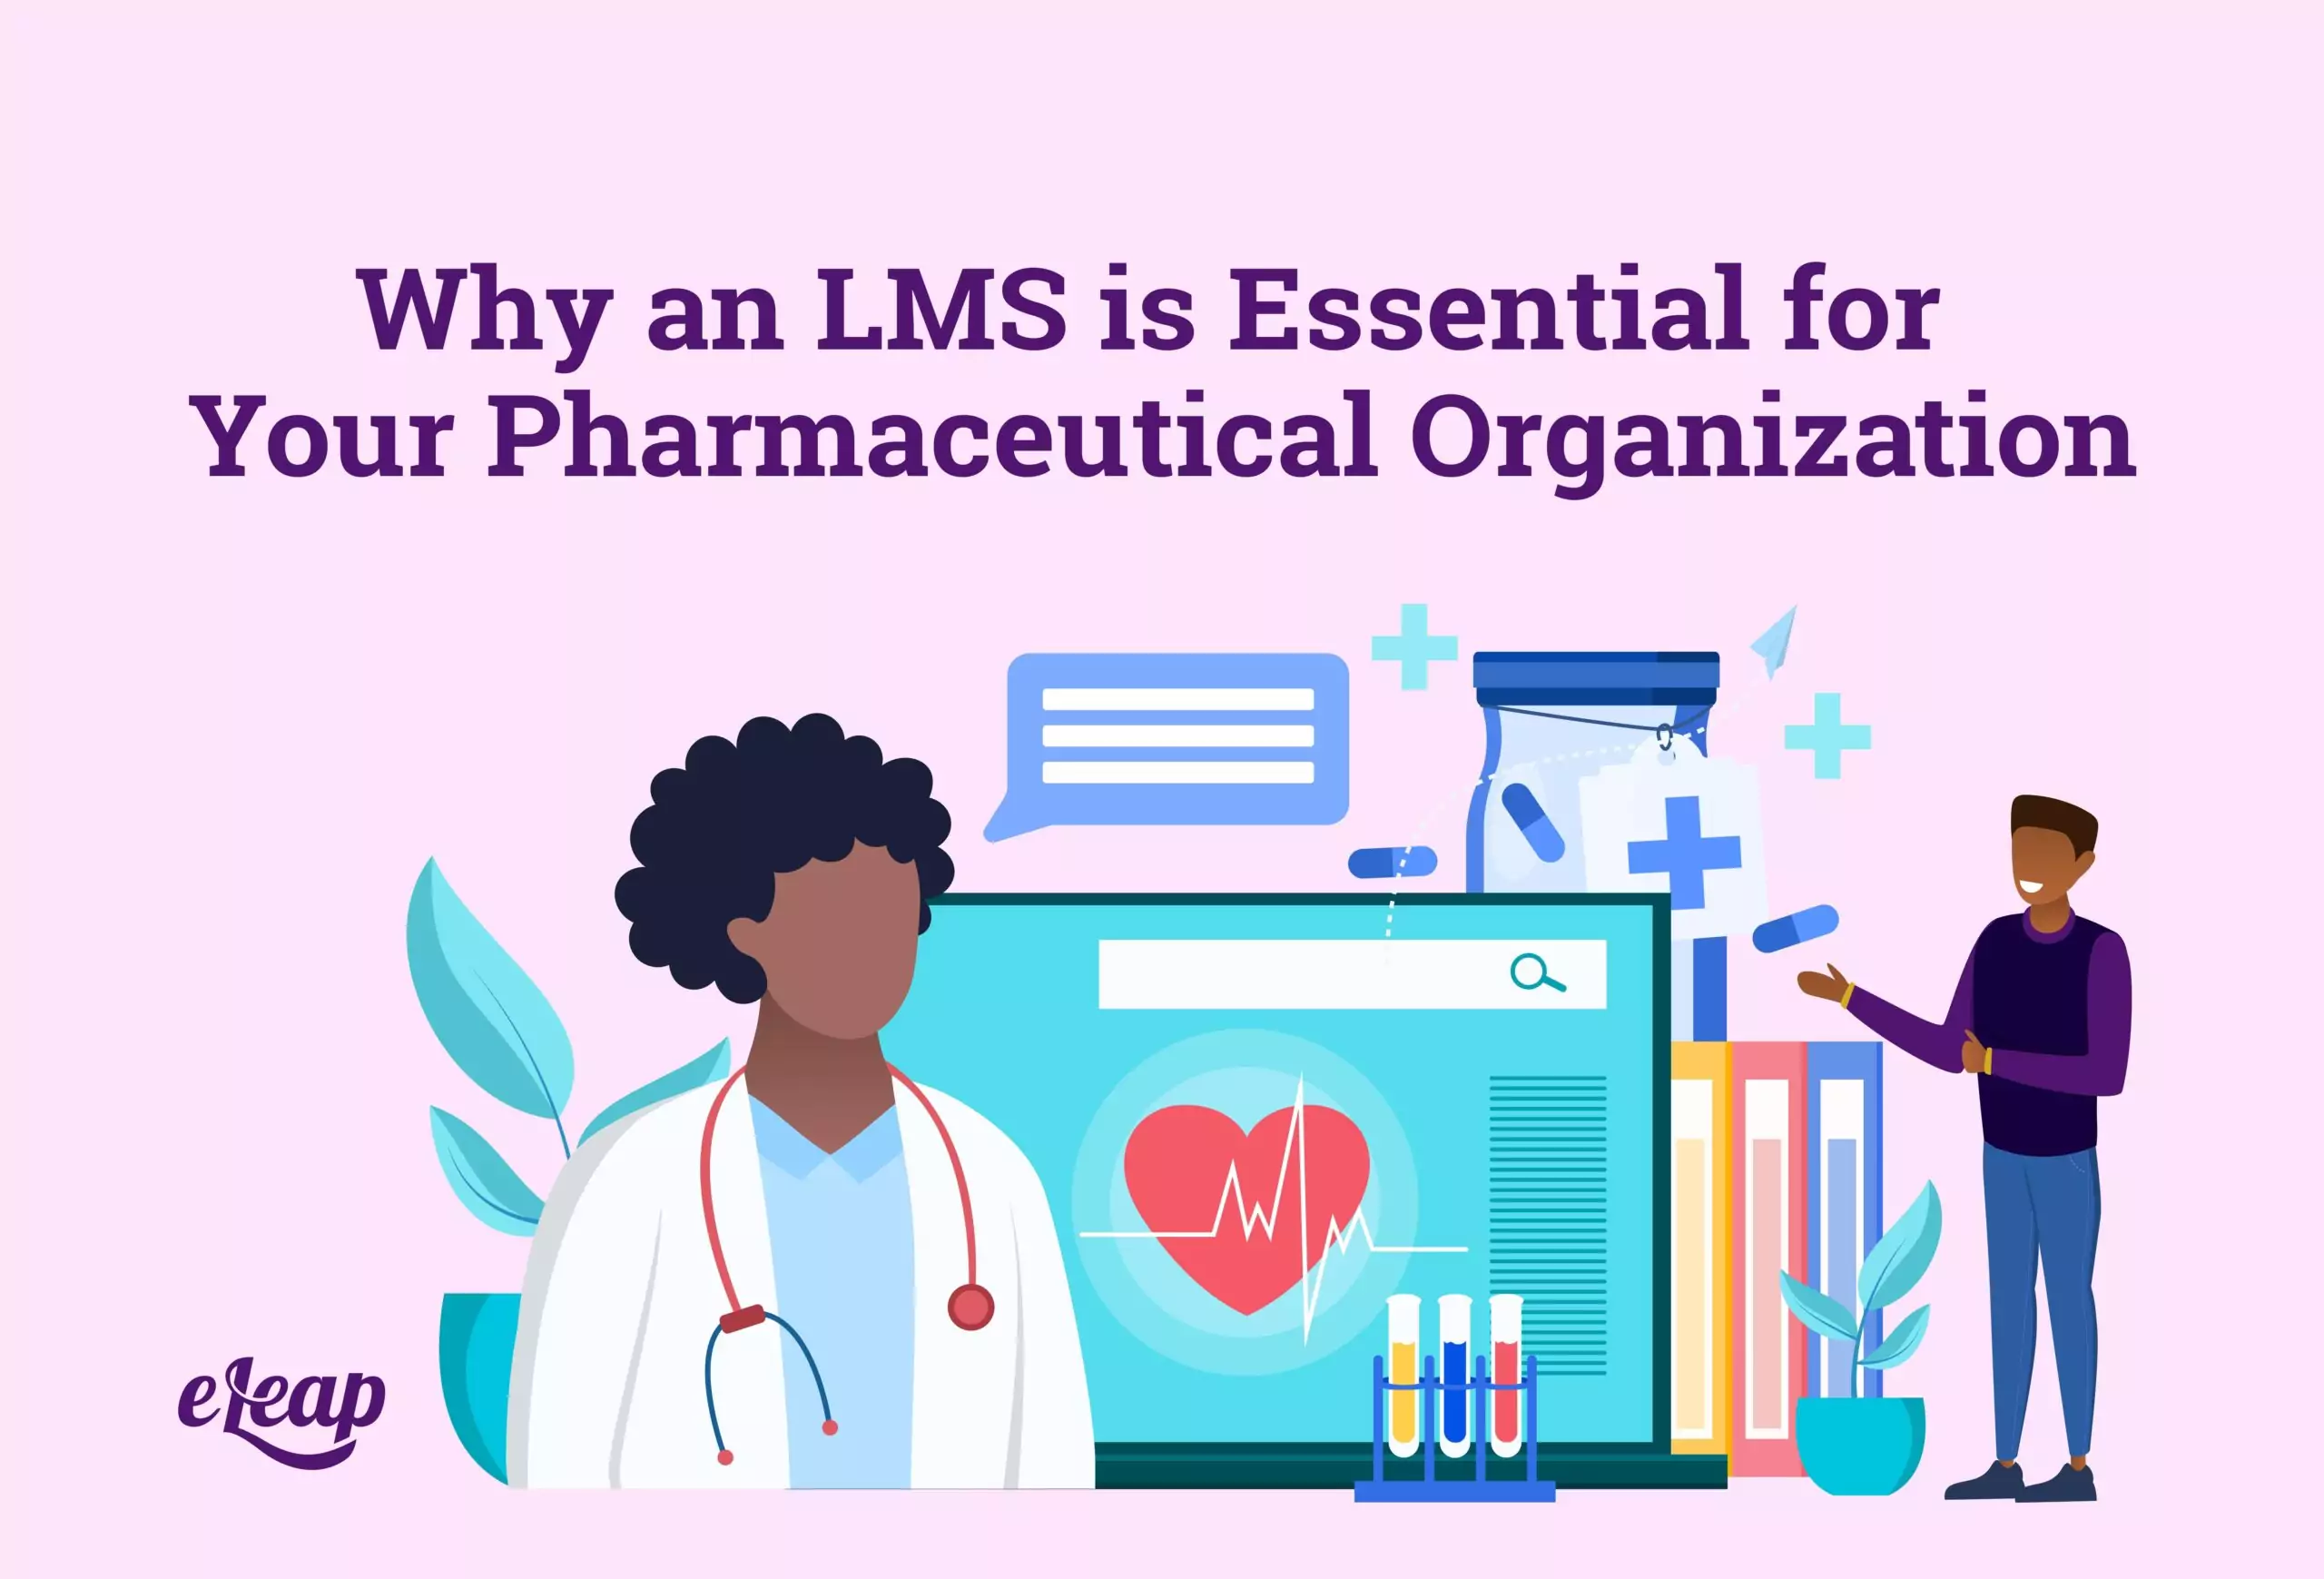 Why an LMS is Essential for Your Pharmaceutical Organization